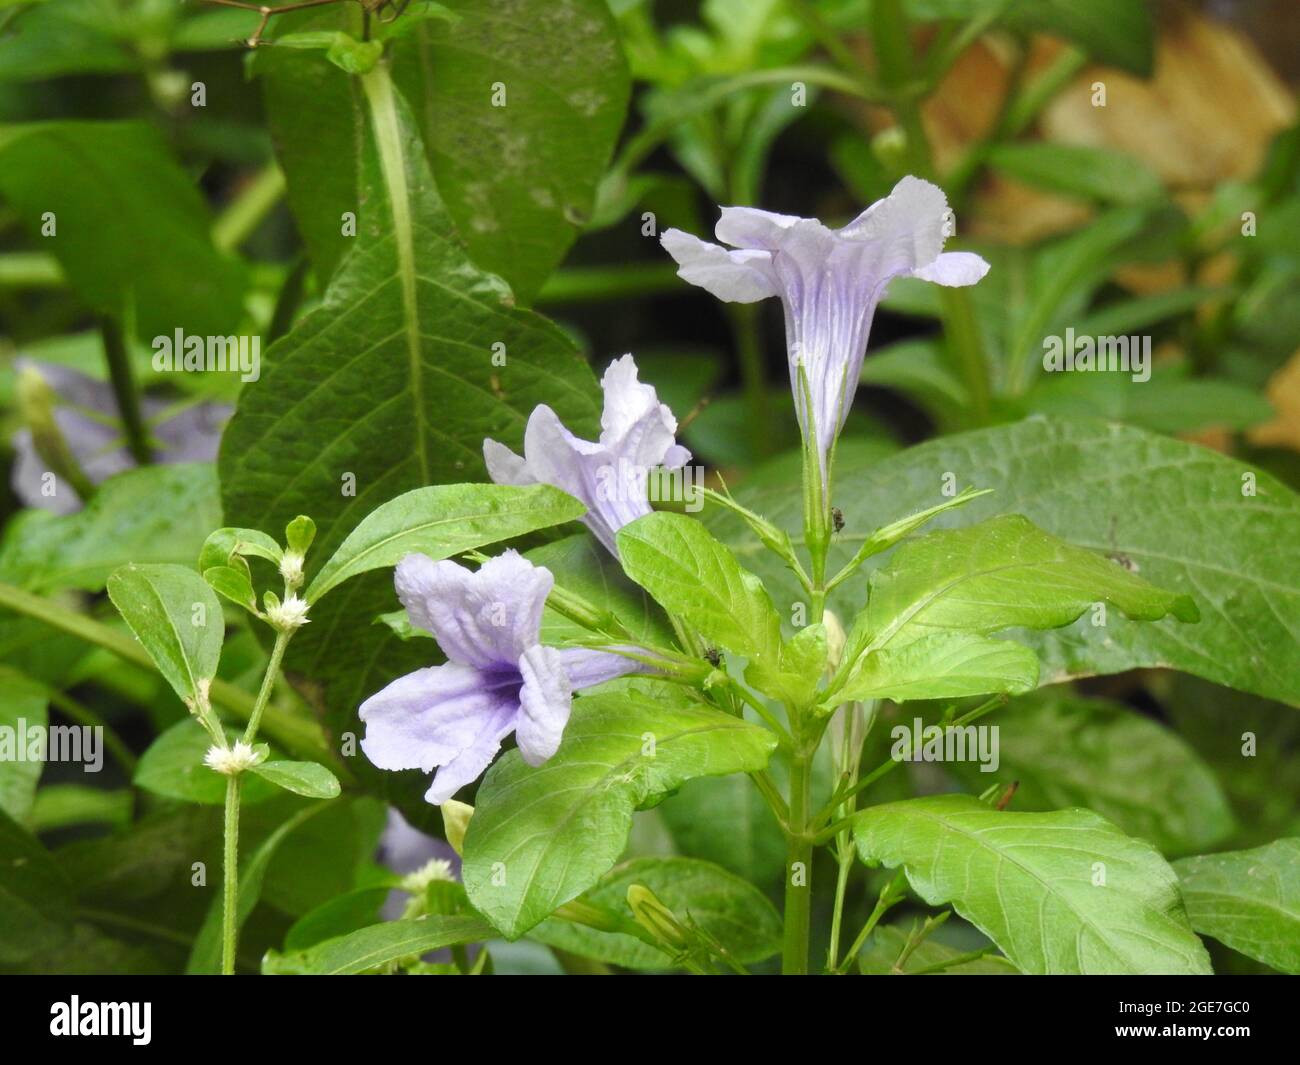 Closeup of beautiful Bengal clockvine or Morning purple flower in a plant with leaves background Stock Photo